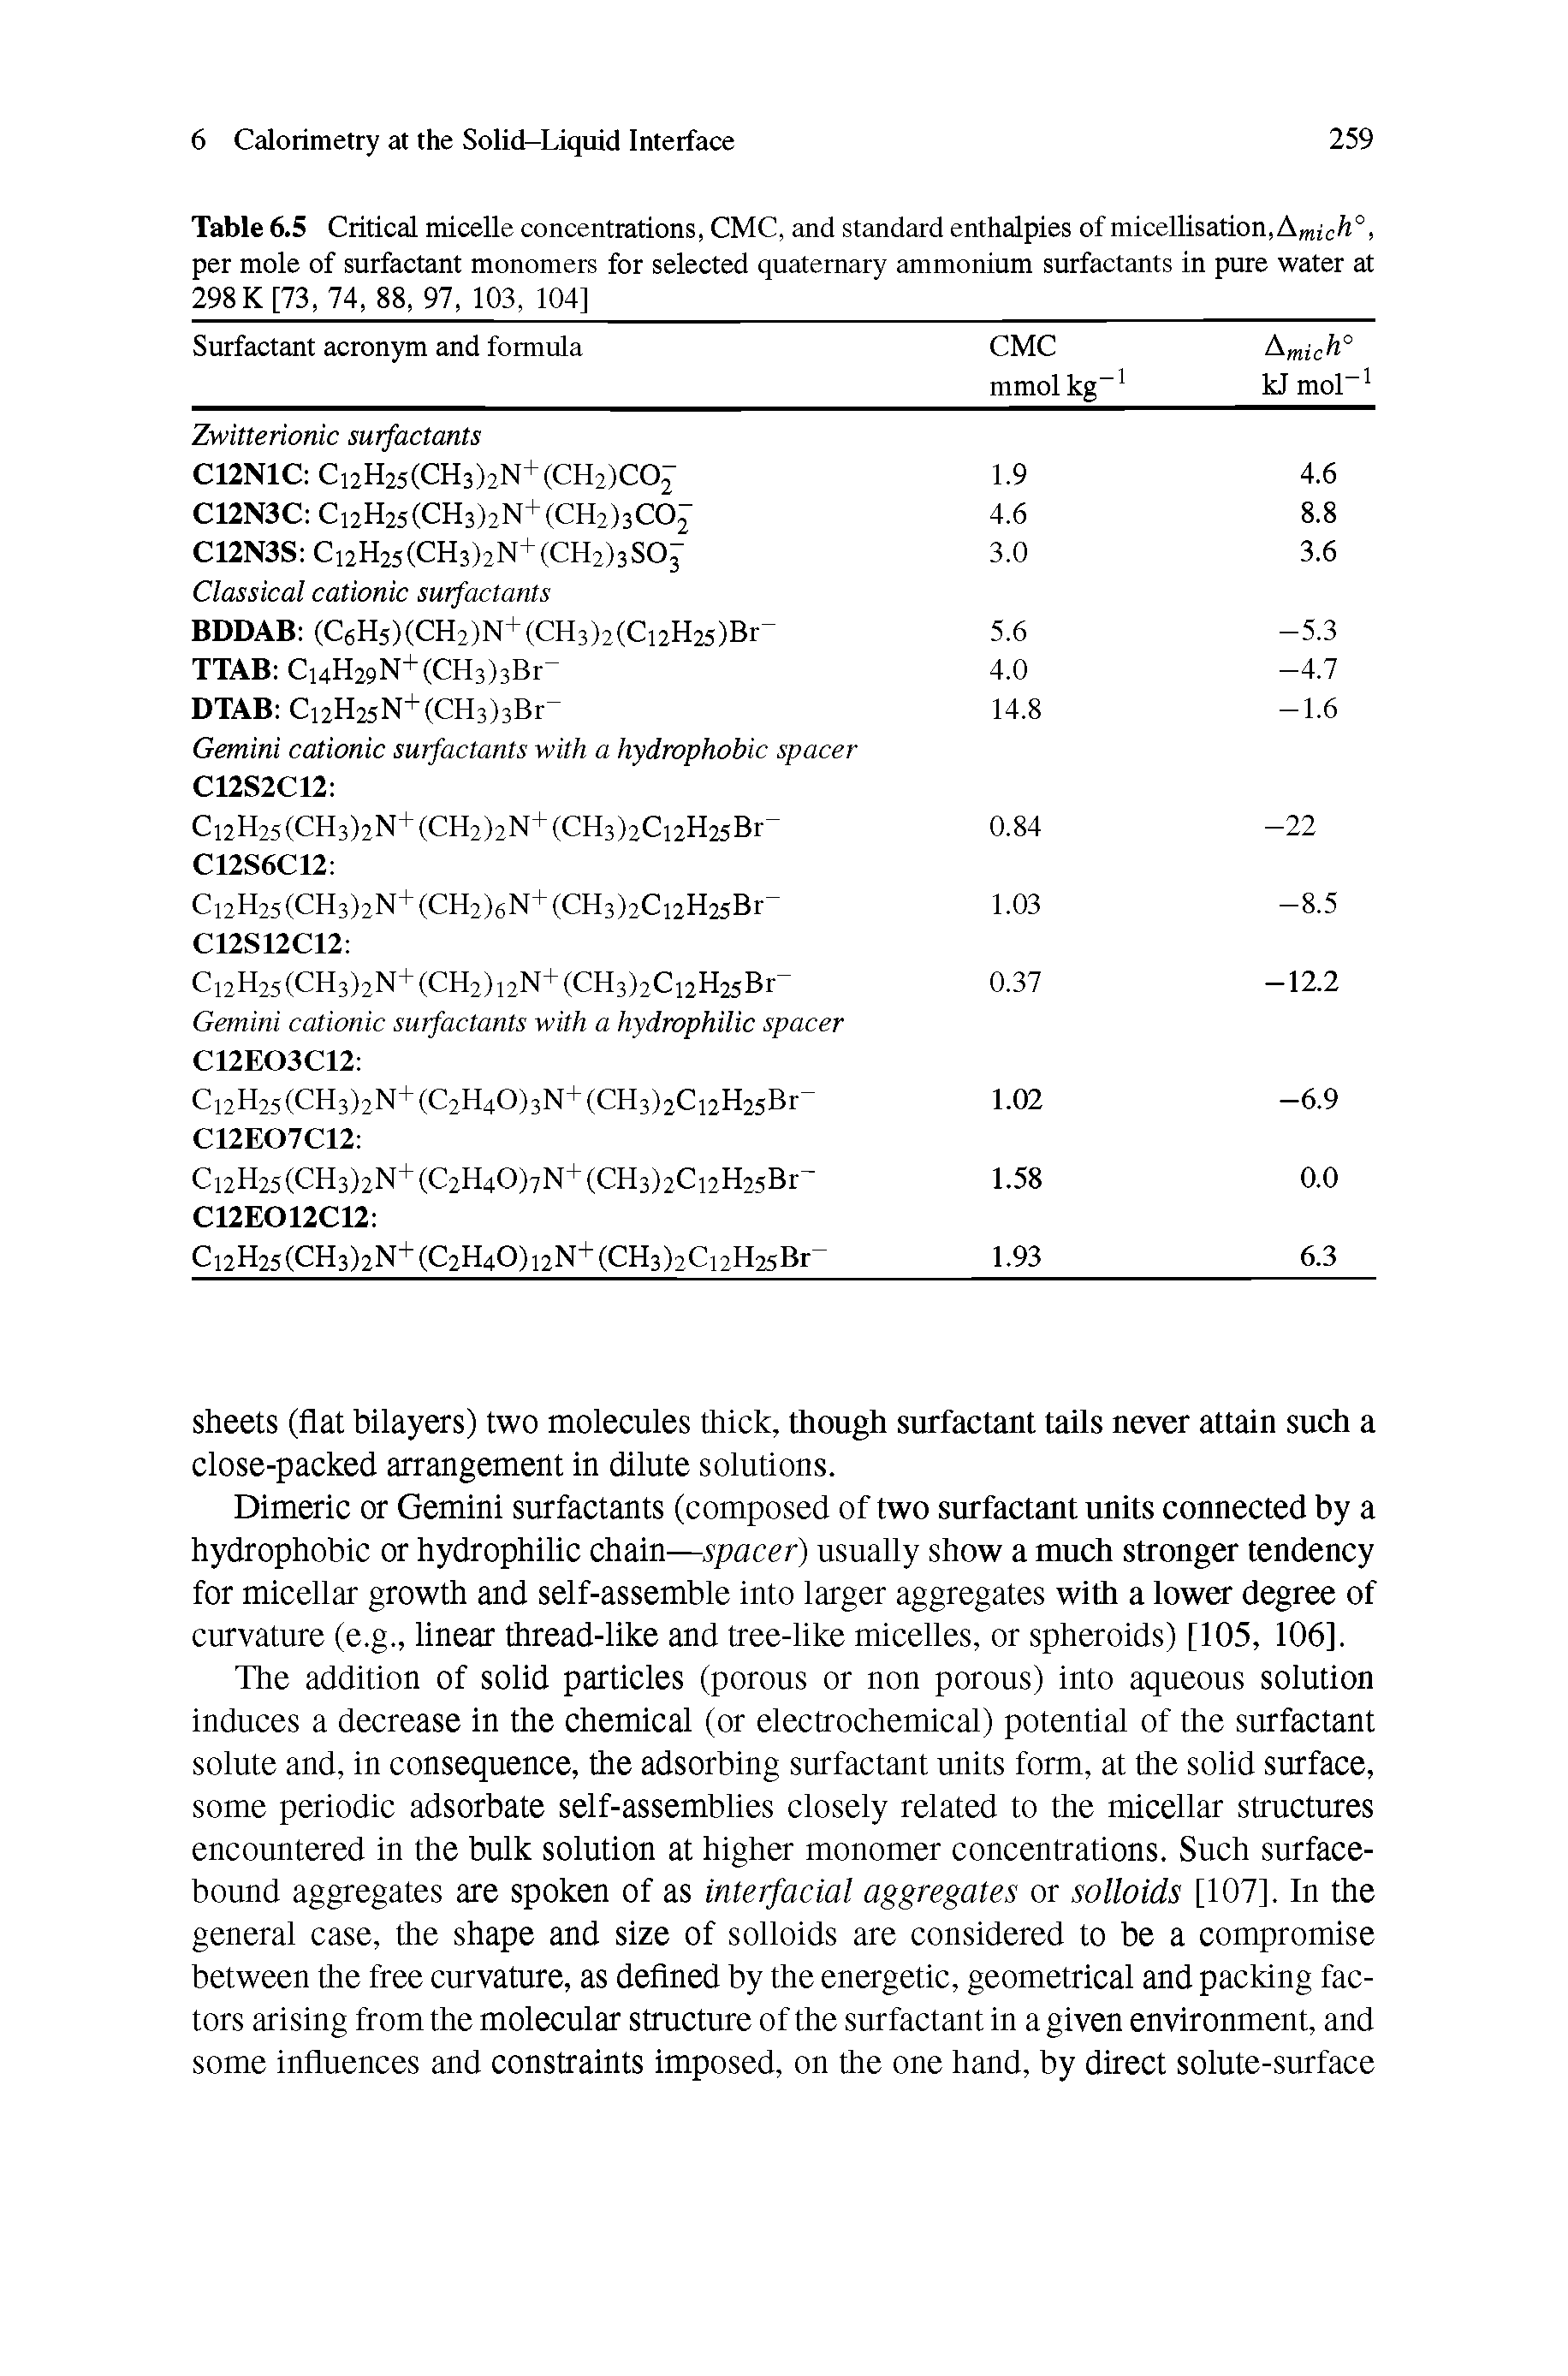 Table 6.5 Critical micelle concentrations, CMC, and standard enthalpies of micellisation,Amiclt°i per mole of surfactant monomers for selected quaternary ammonium surfactants in pure water at 298 K [73, 74, 88, 97, 103, 104]...